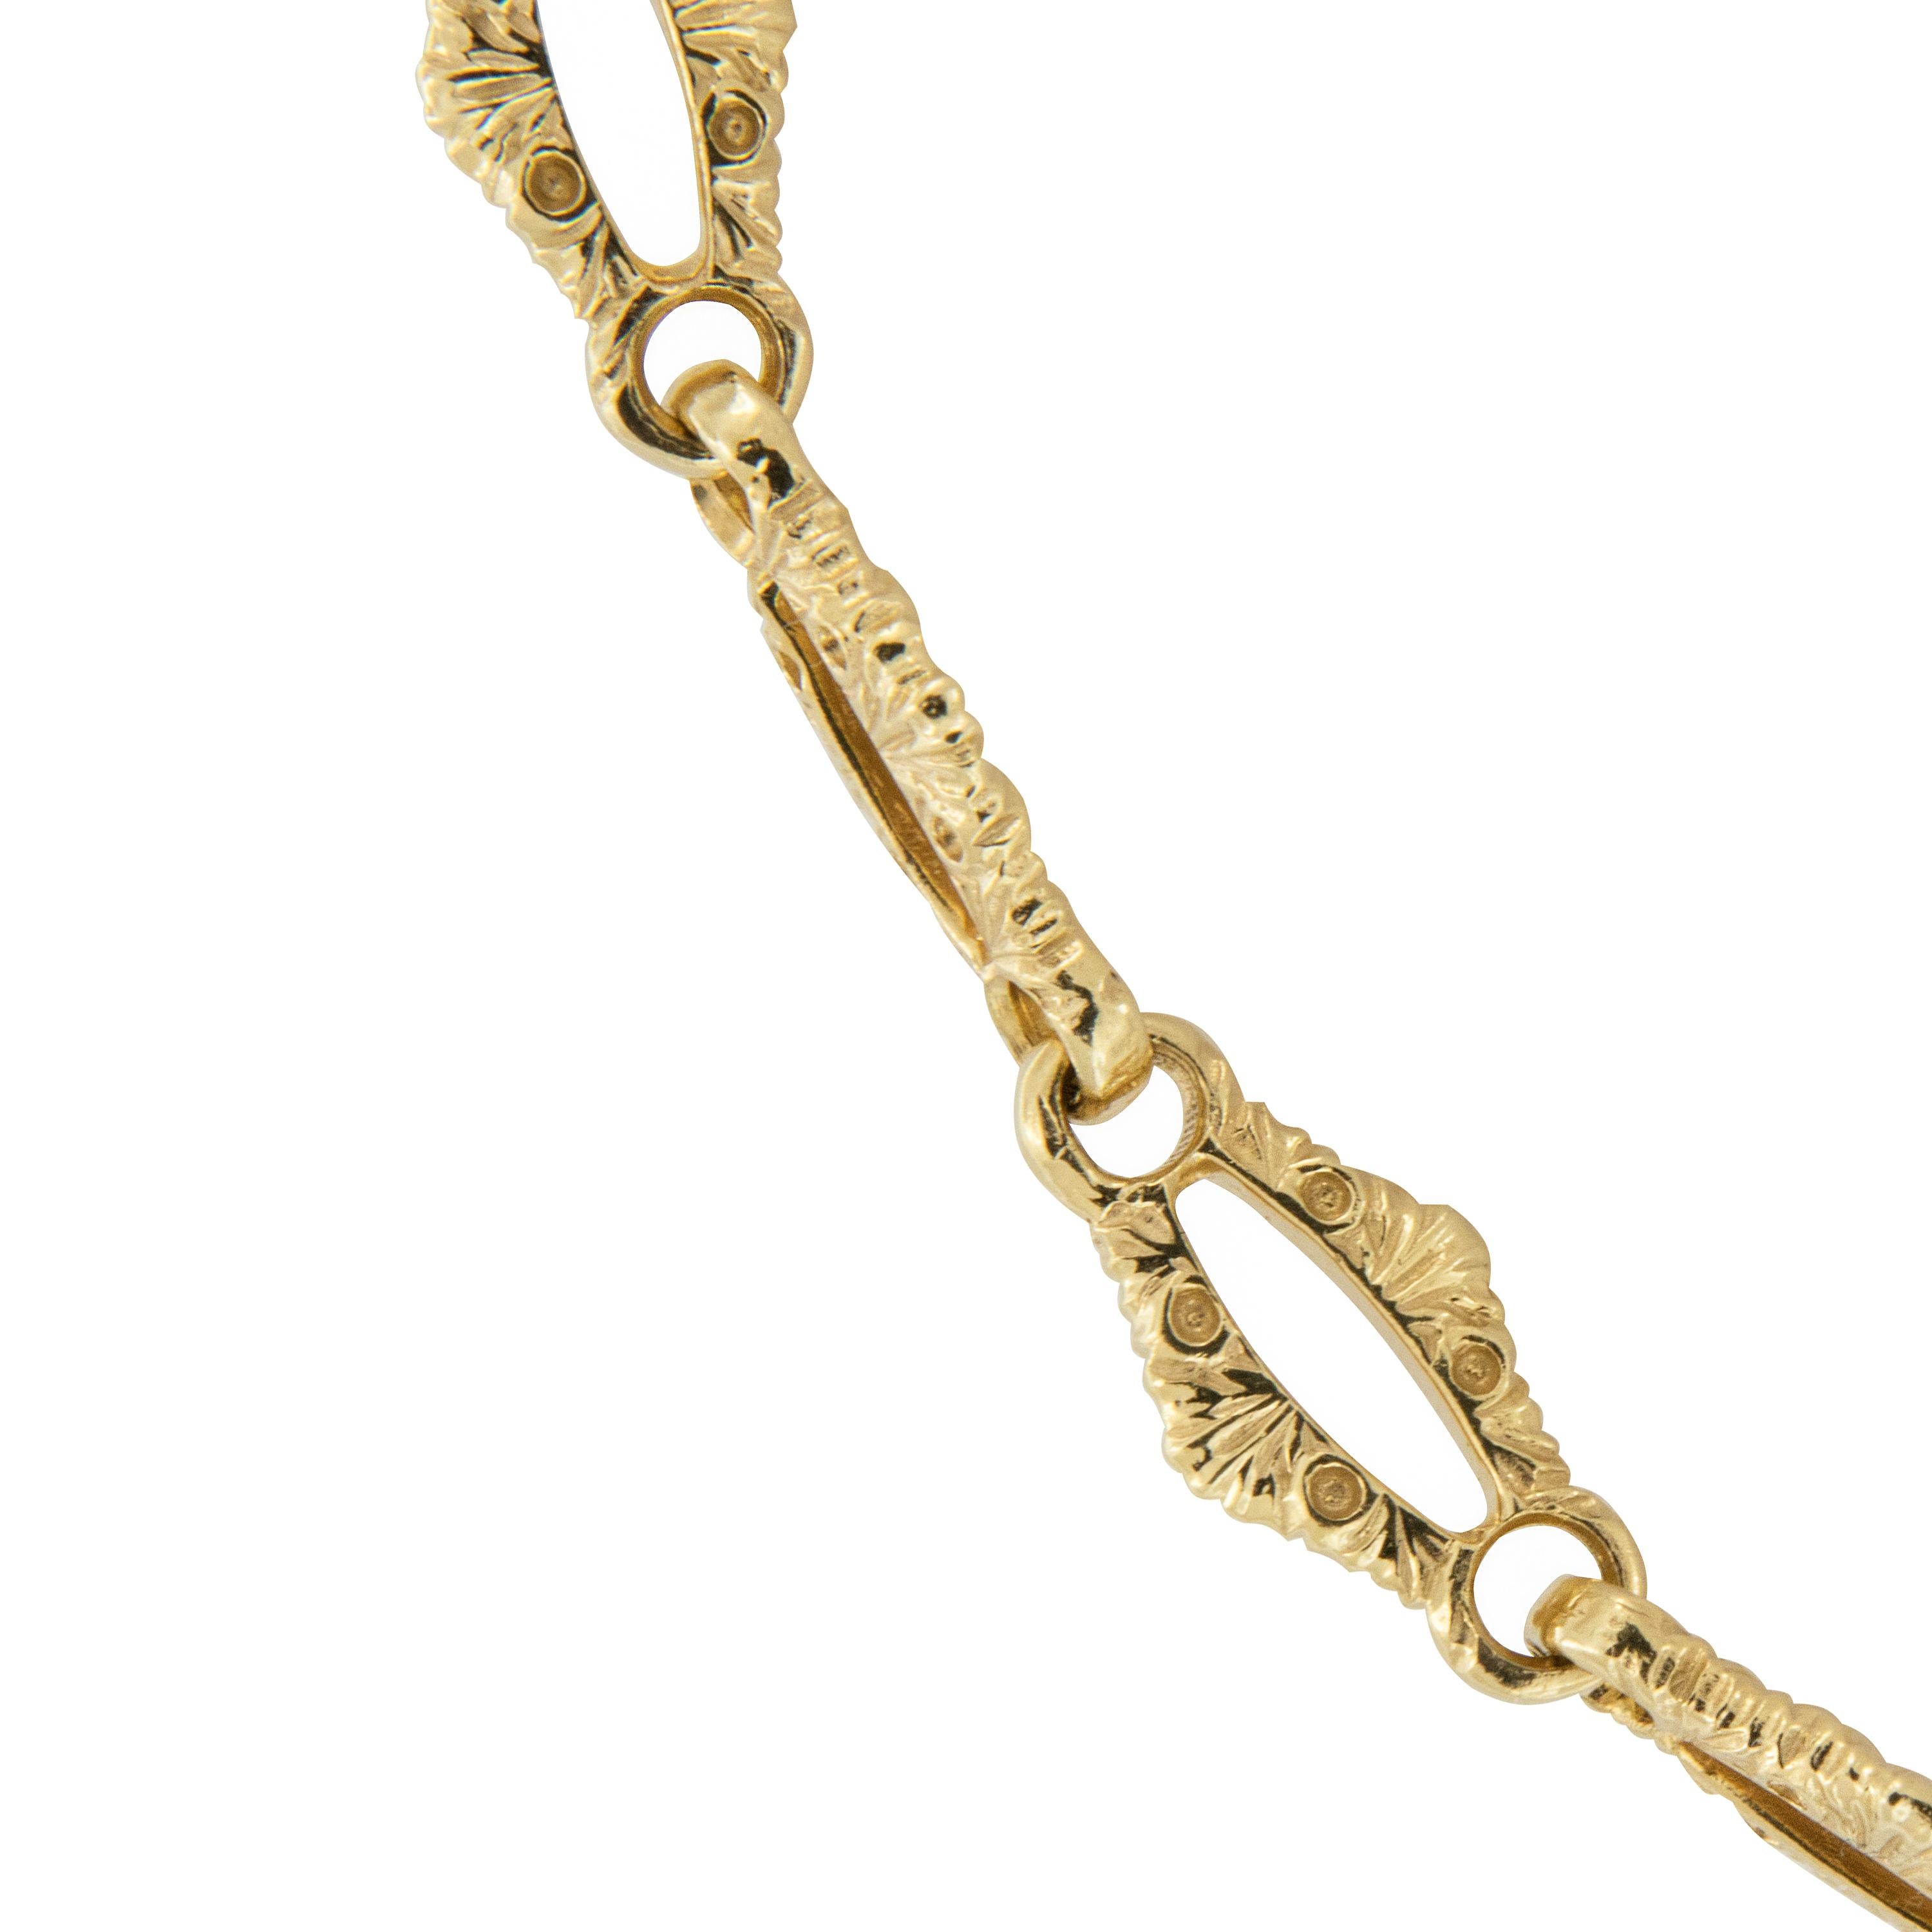 Goshwara, a term for perfect shape, is a company known for exceptional color gems and this gorgeous fancy link necklace has the absolutely perfect shape! Warm 18 karat yellow gold handmade & assembled marquise shaped links have an exquisite pattern